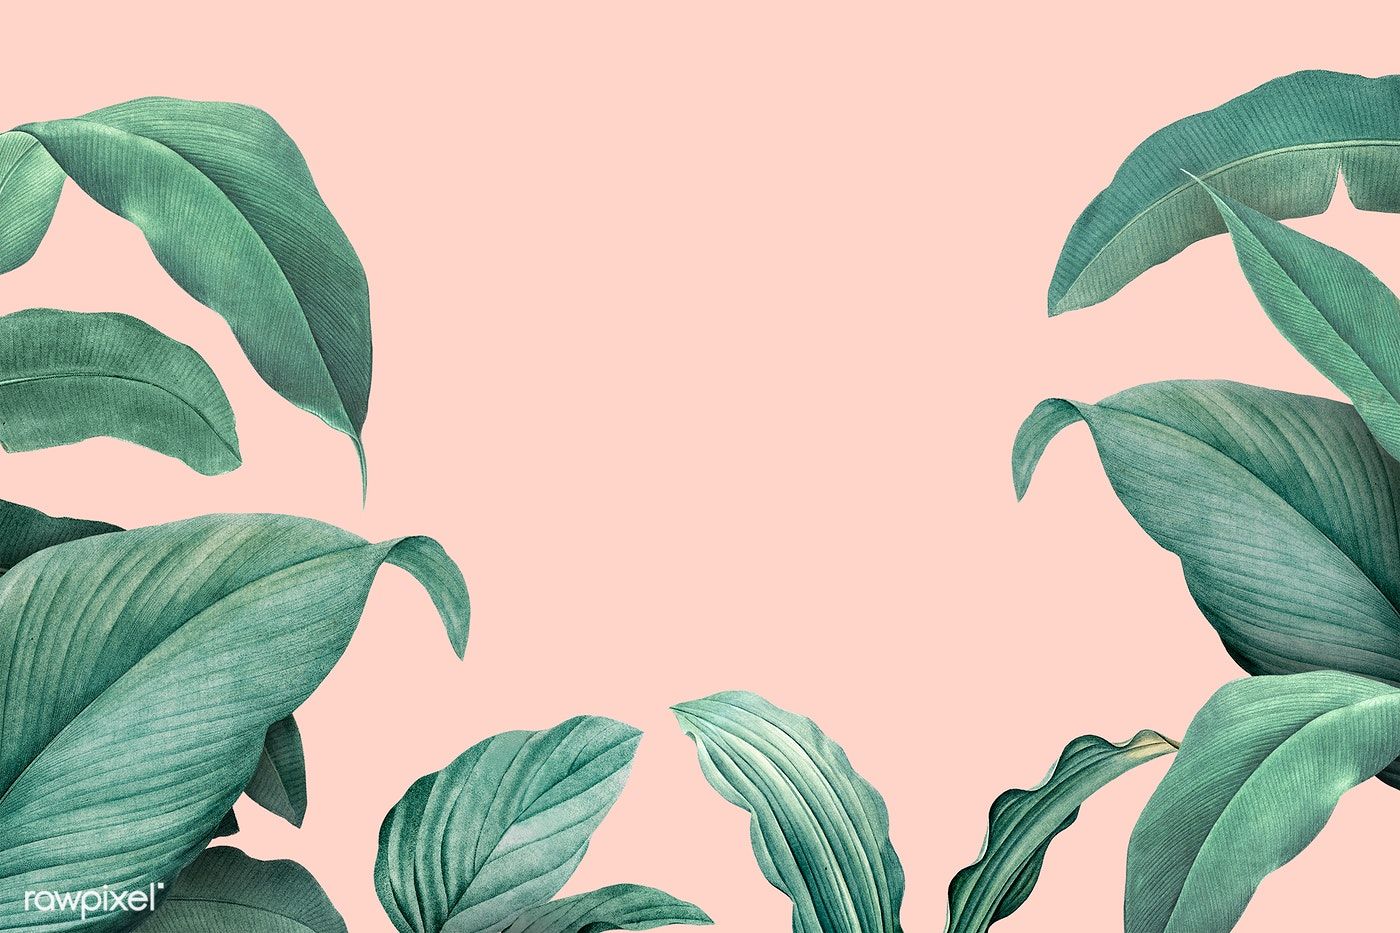 Hand drawn tropical leaves on a pastel pink background. Tropical leaves, How to draw hands, Tropical background